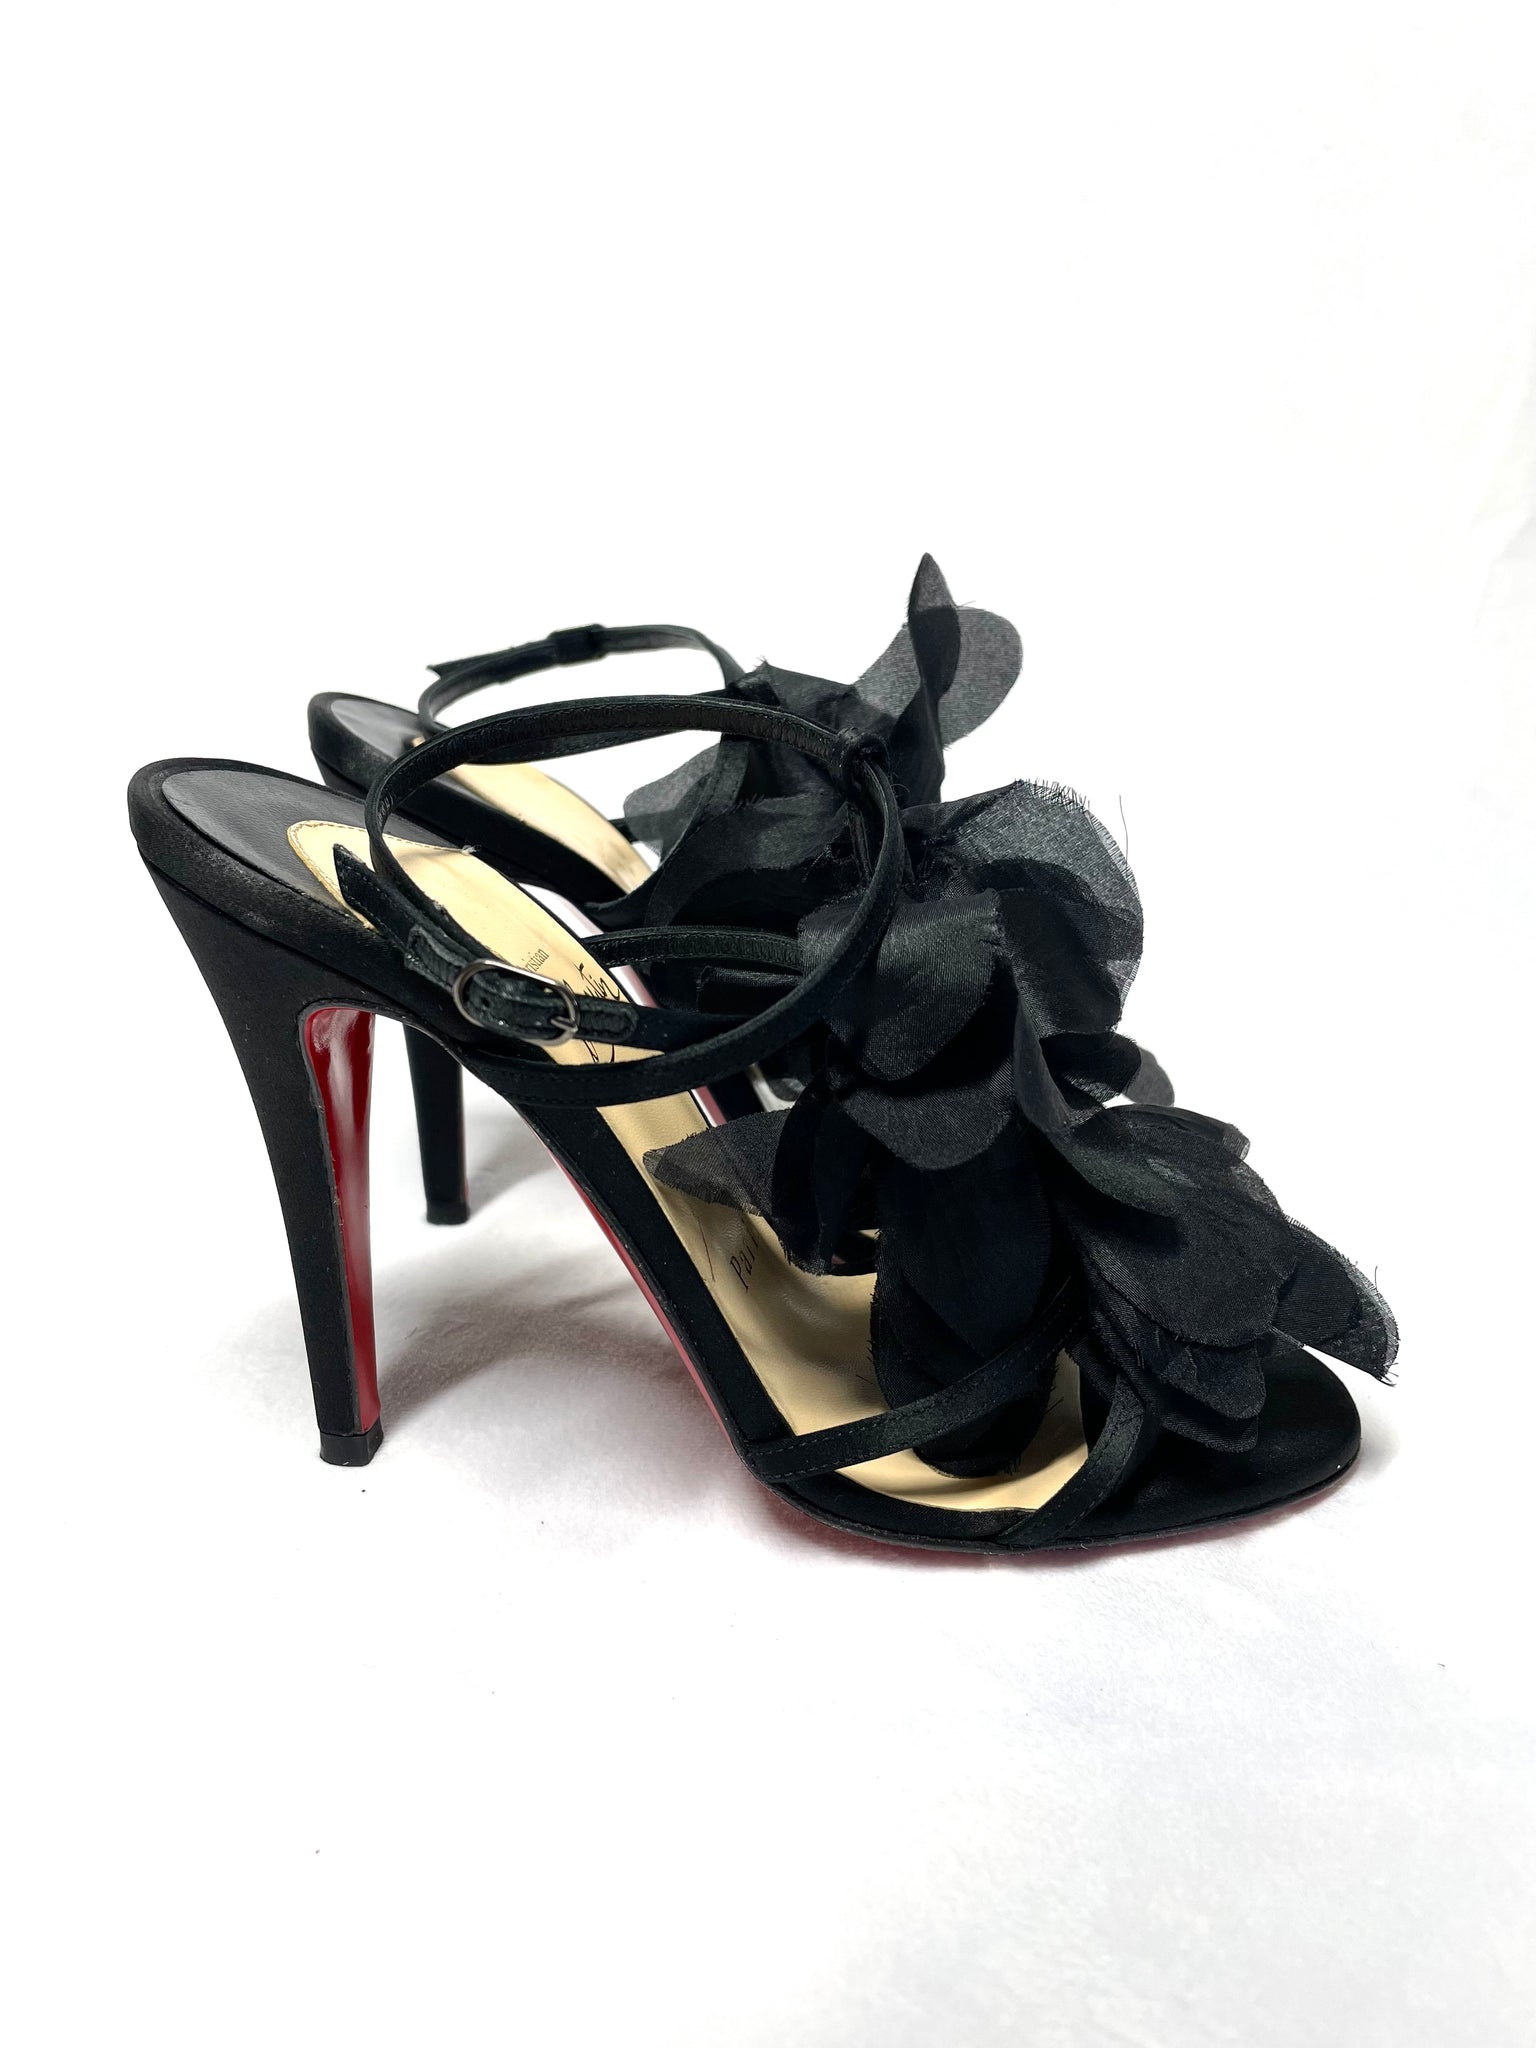 Pre Loved Christian Louboutin Mount Street Crepe Satin 36 Black Heels available at UniKoncept in Waterloo